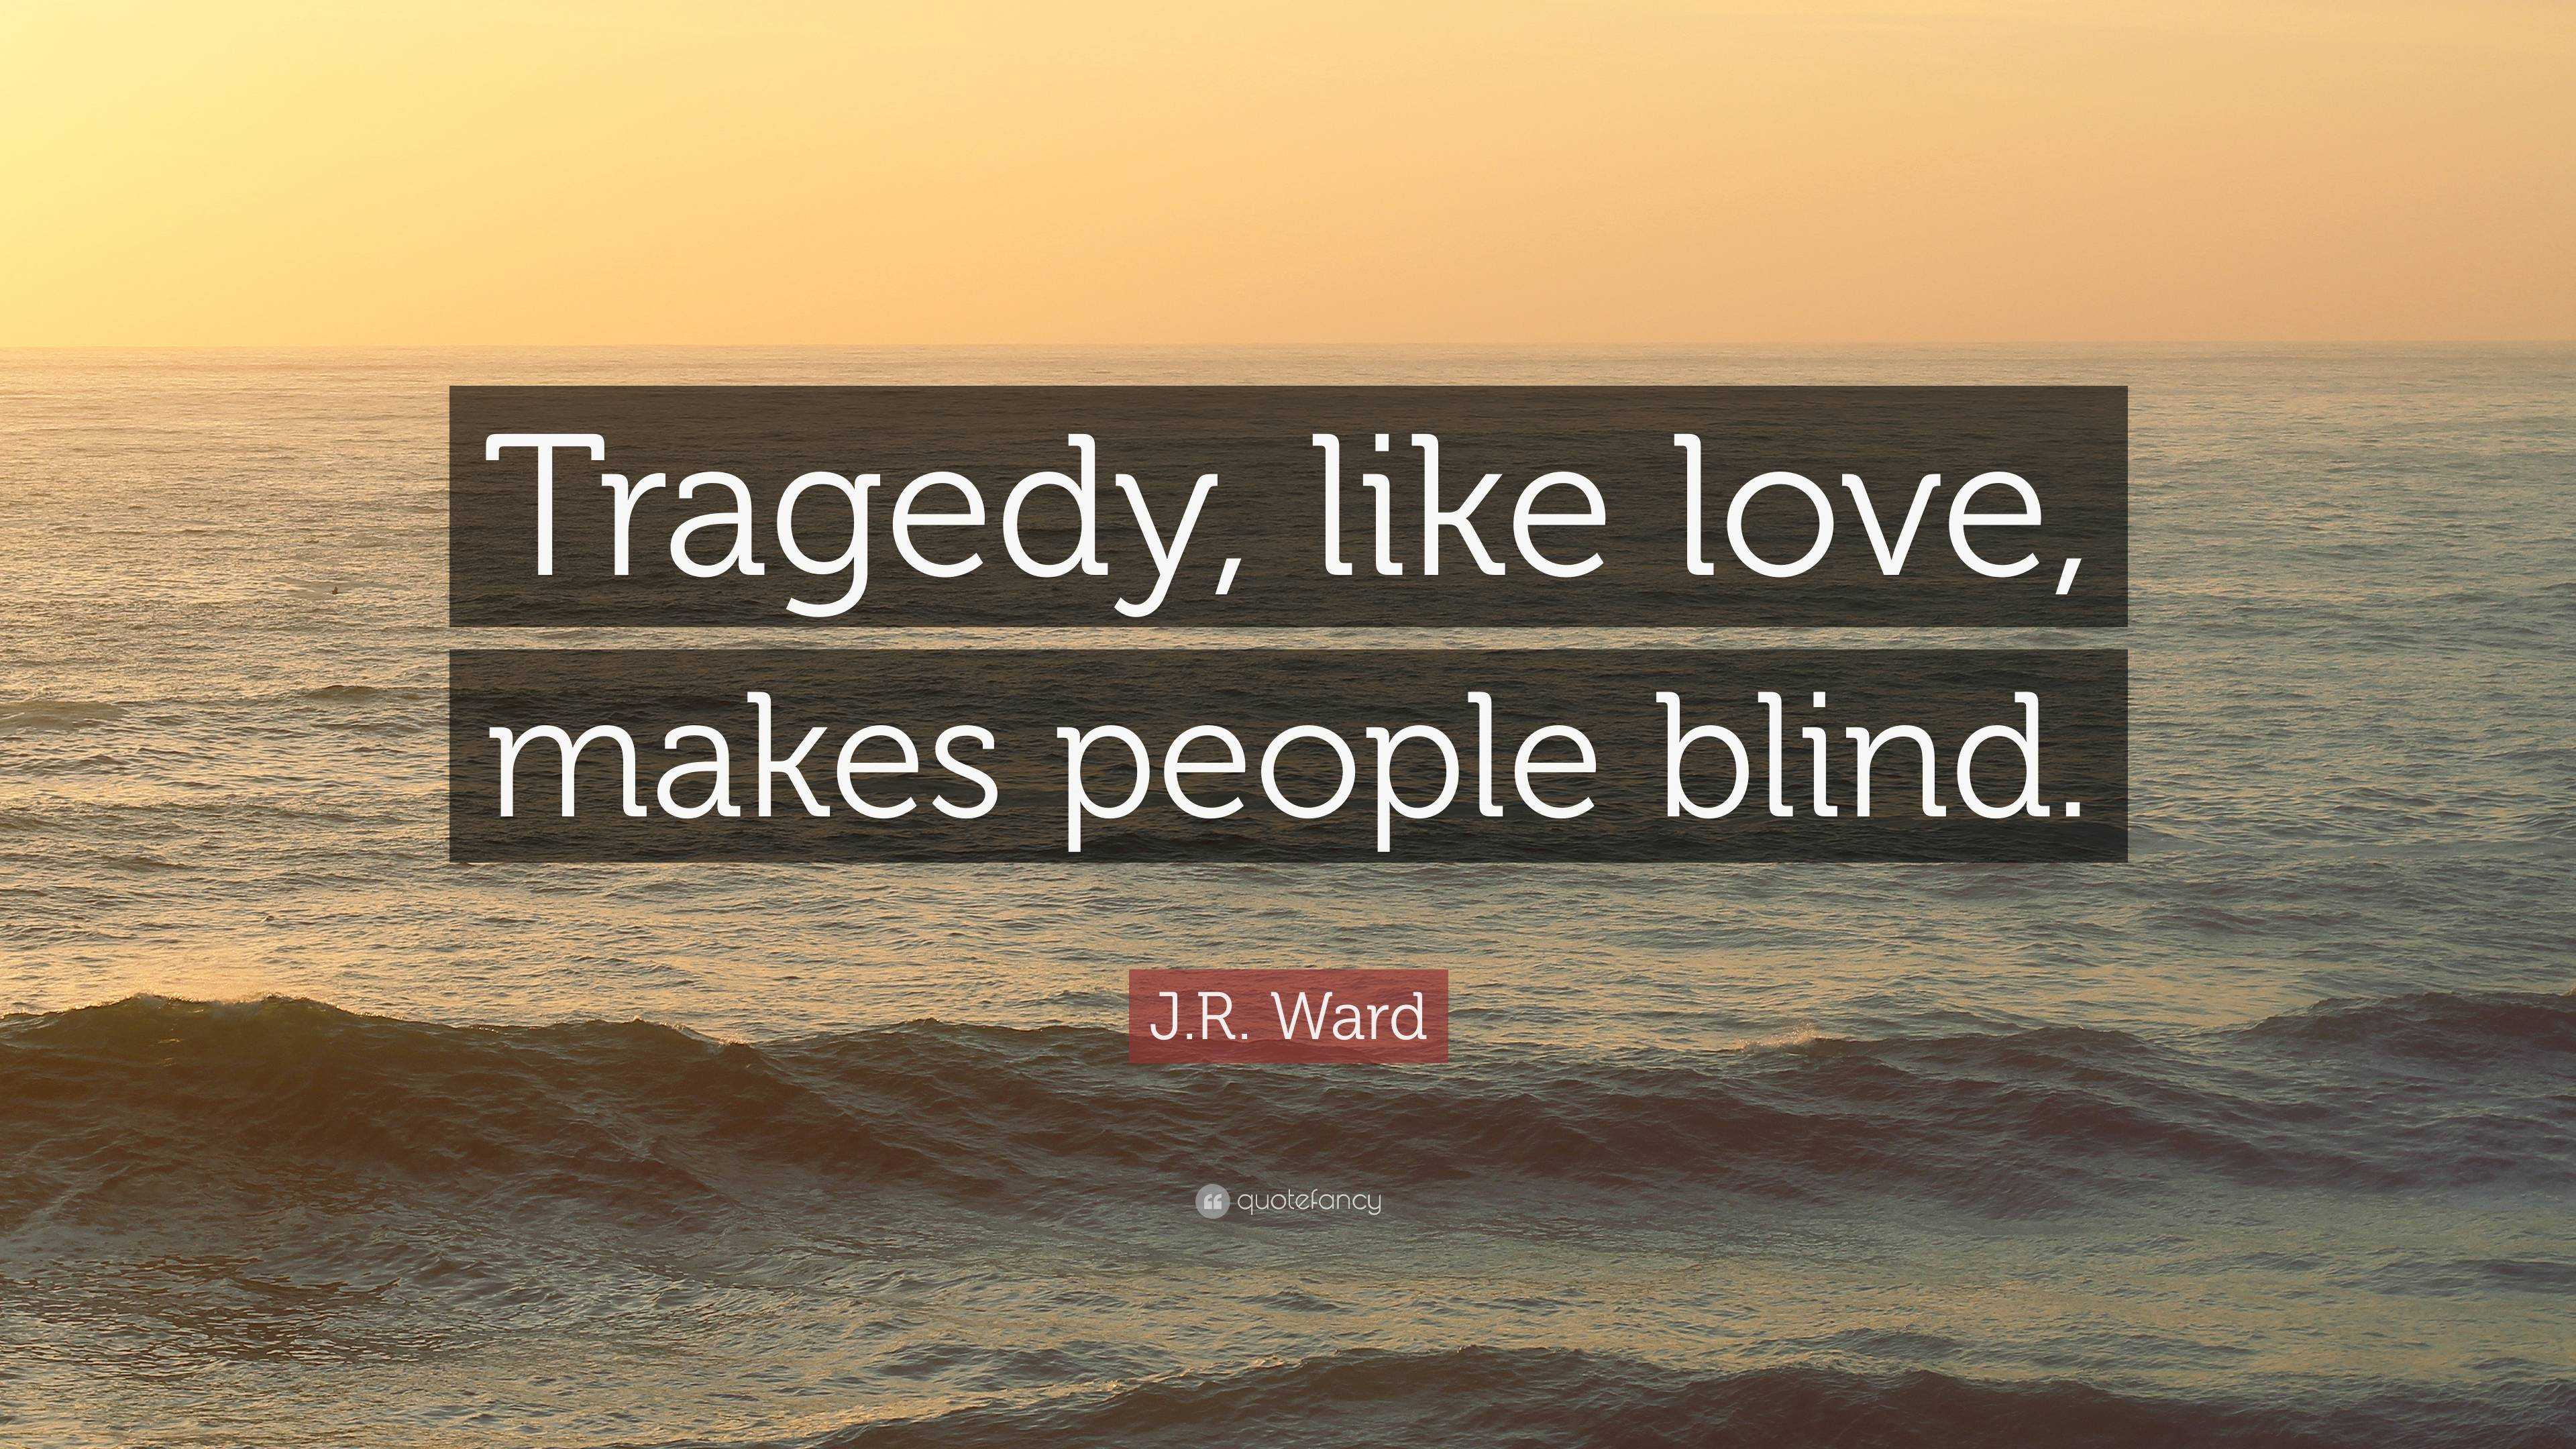 . Ward Quote: “Tragedy, like love, makes people blind.”